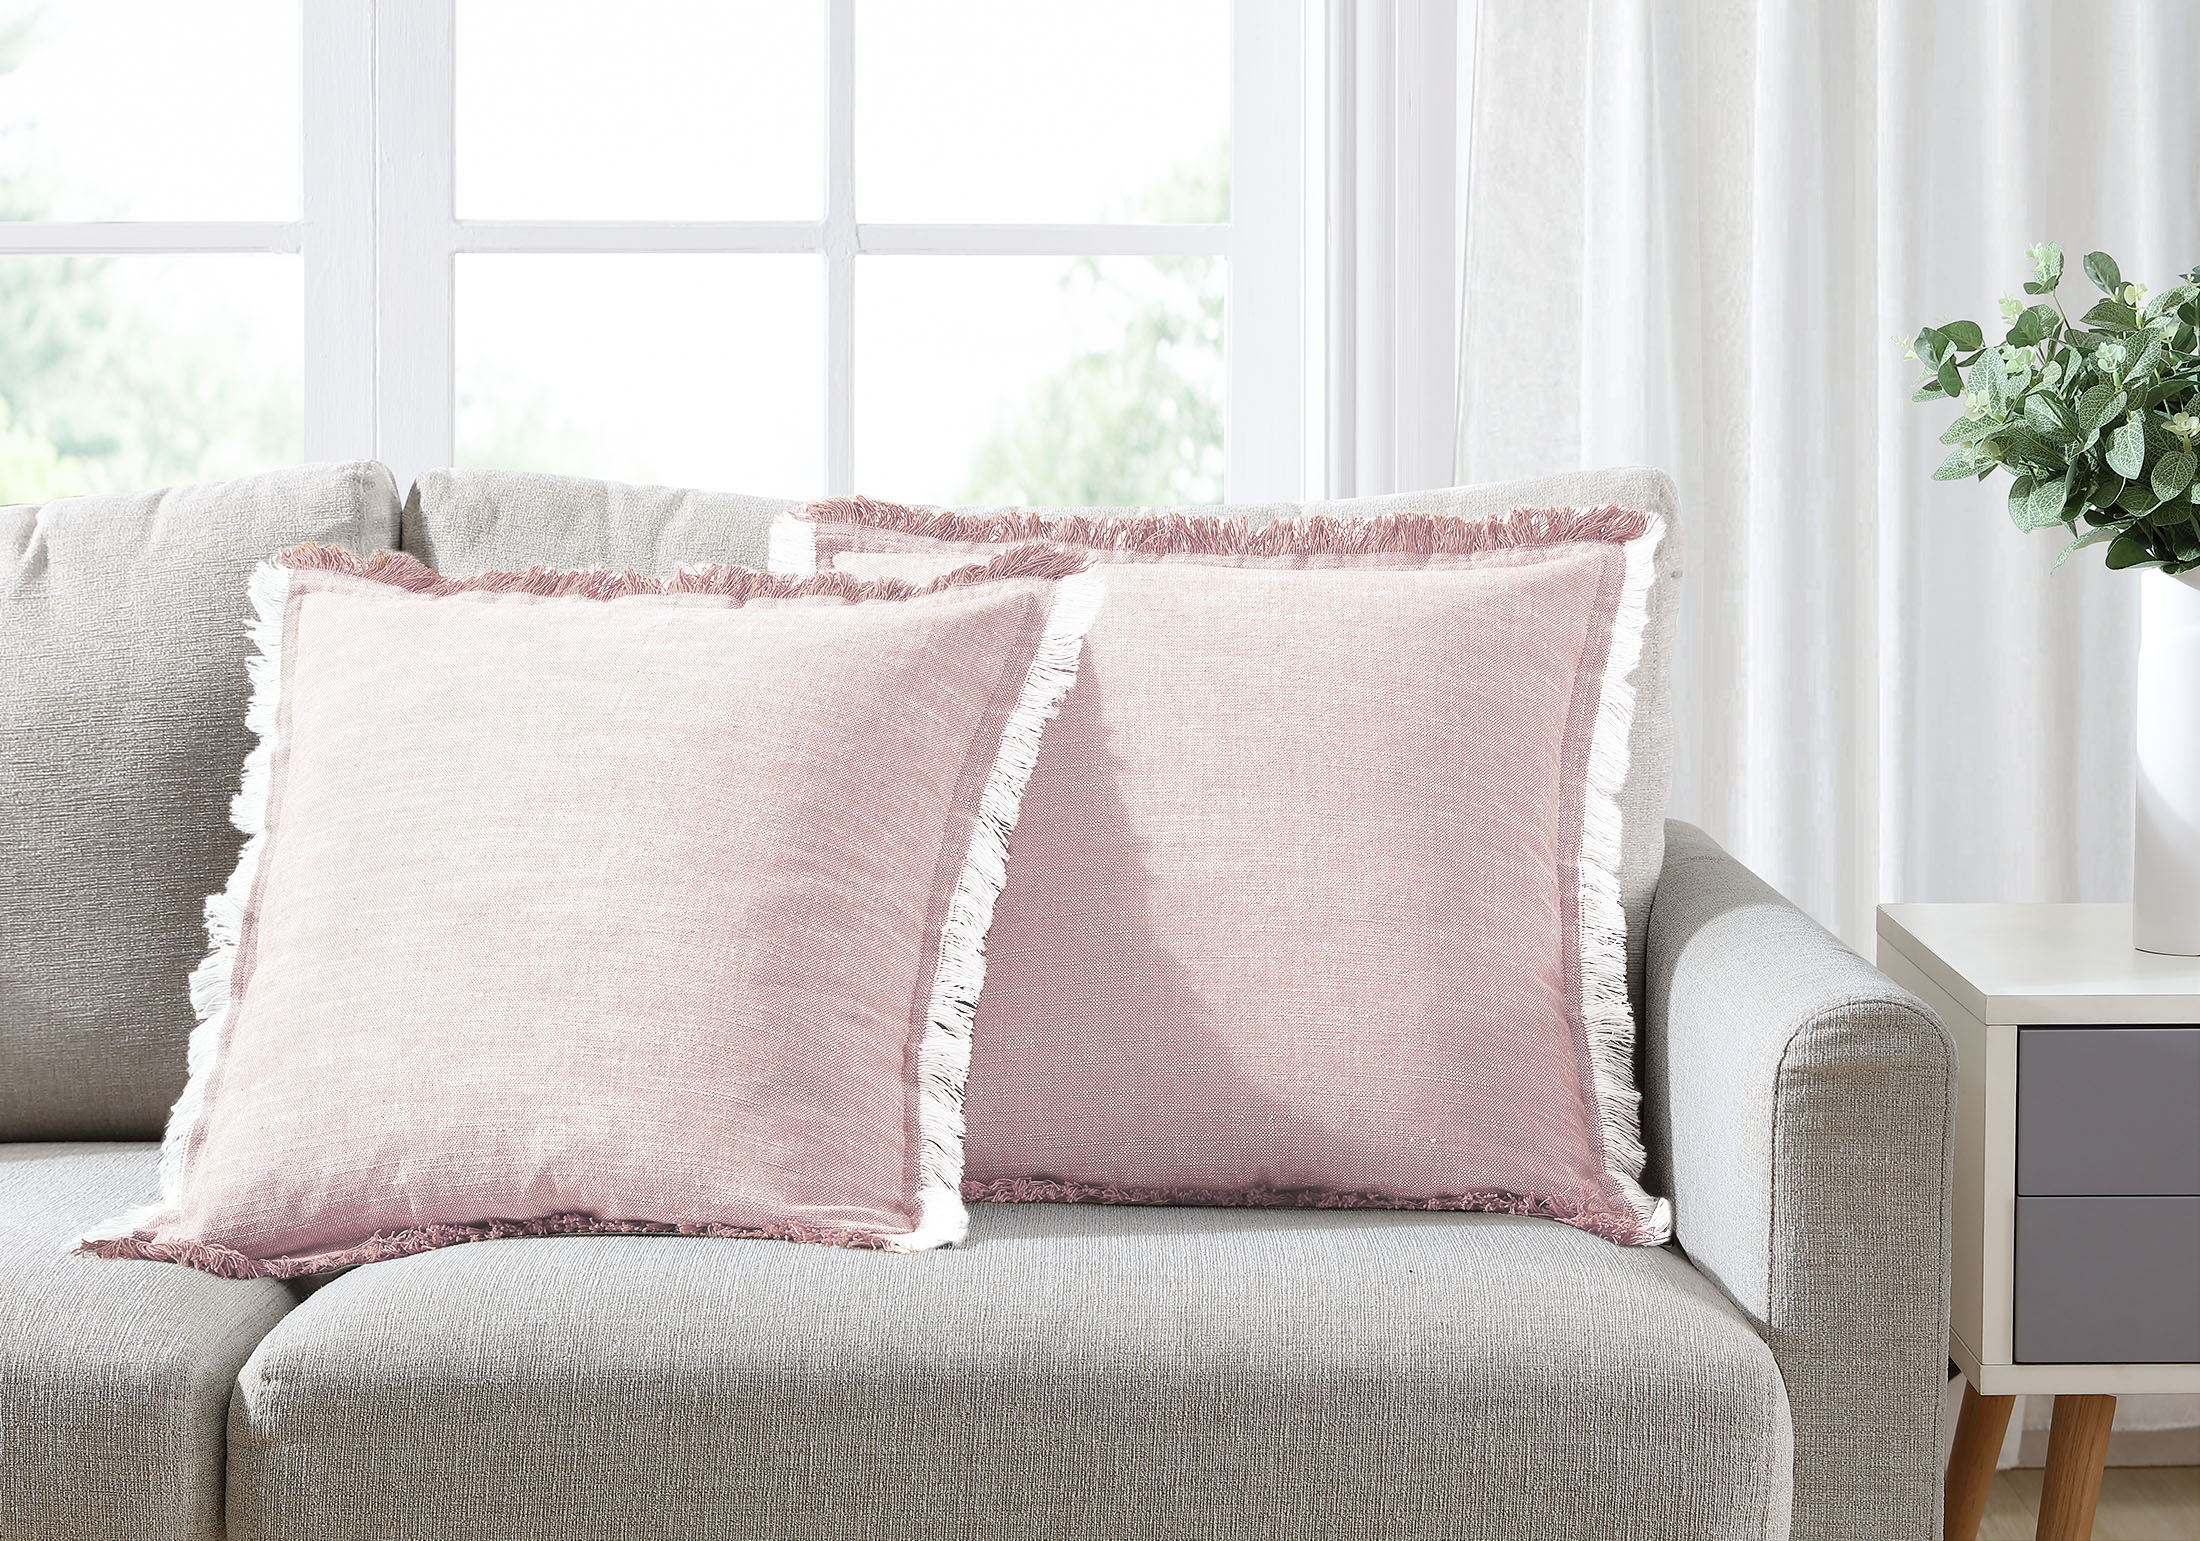 Better Homes & Gardens, Blush Throw Pillows, Square, 20" x 20", Rose Blush, 2 Pack - image 5 of 5